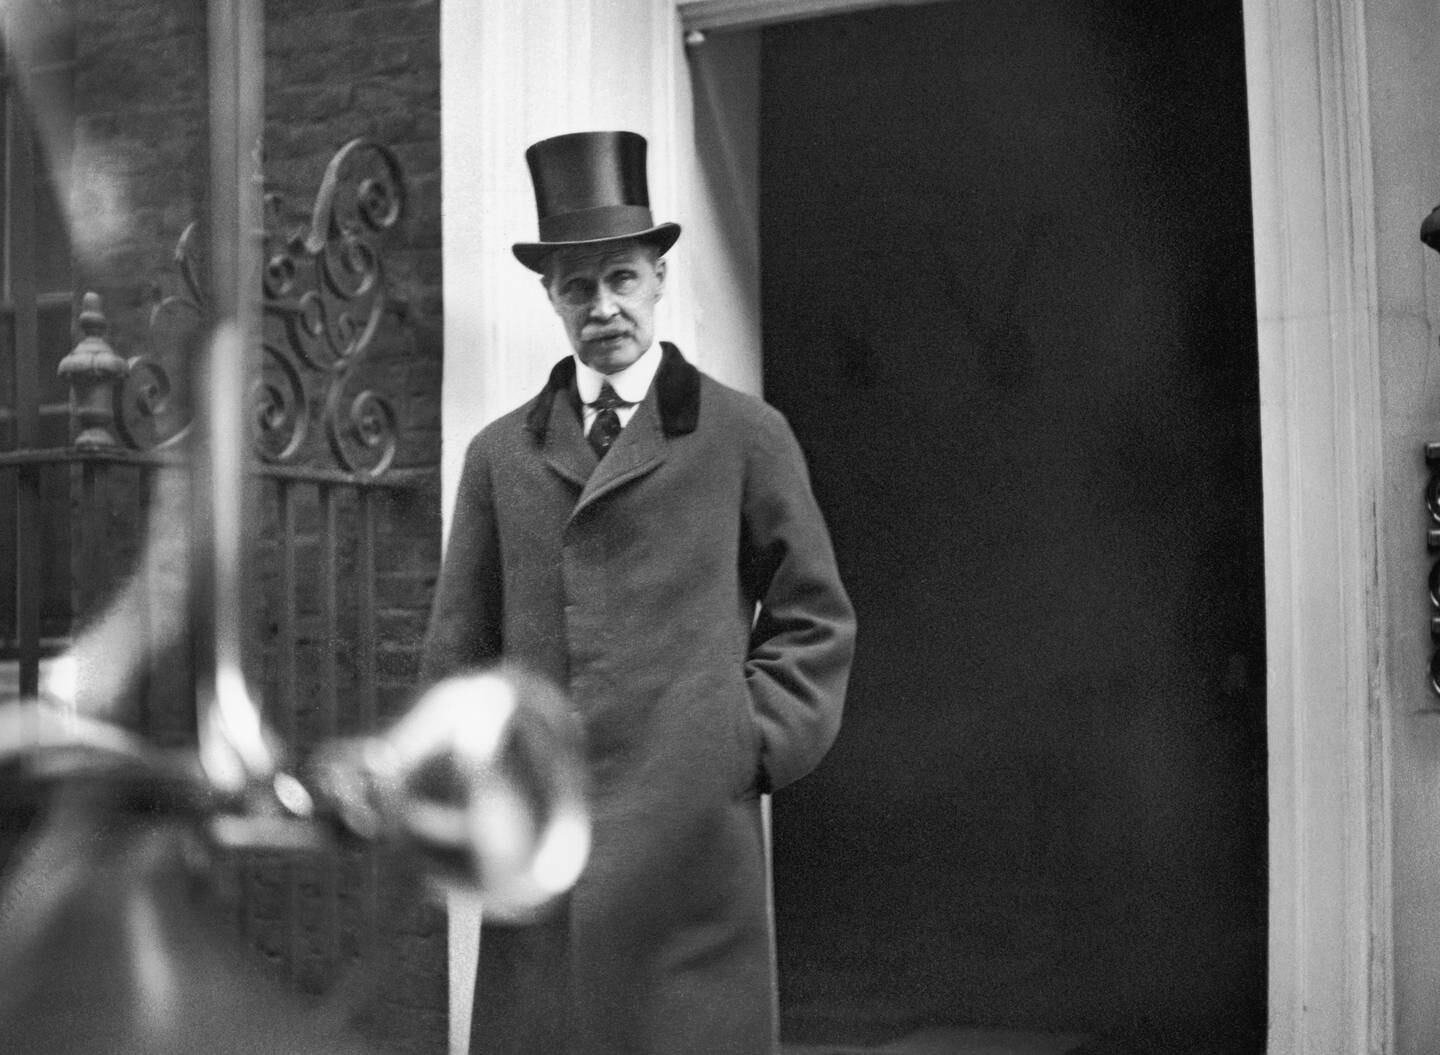 British PM Andrew Bonar Law (1858 - 1923), leaving No 10 Downing Street on budget day, April 1923. Getty